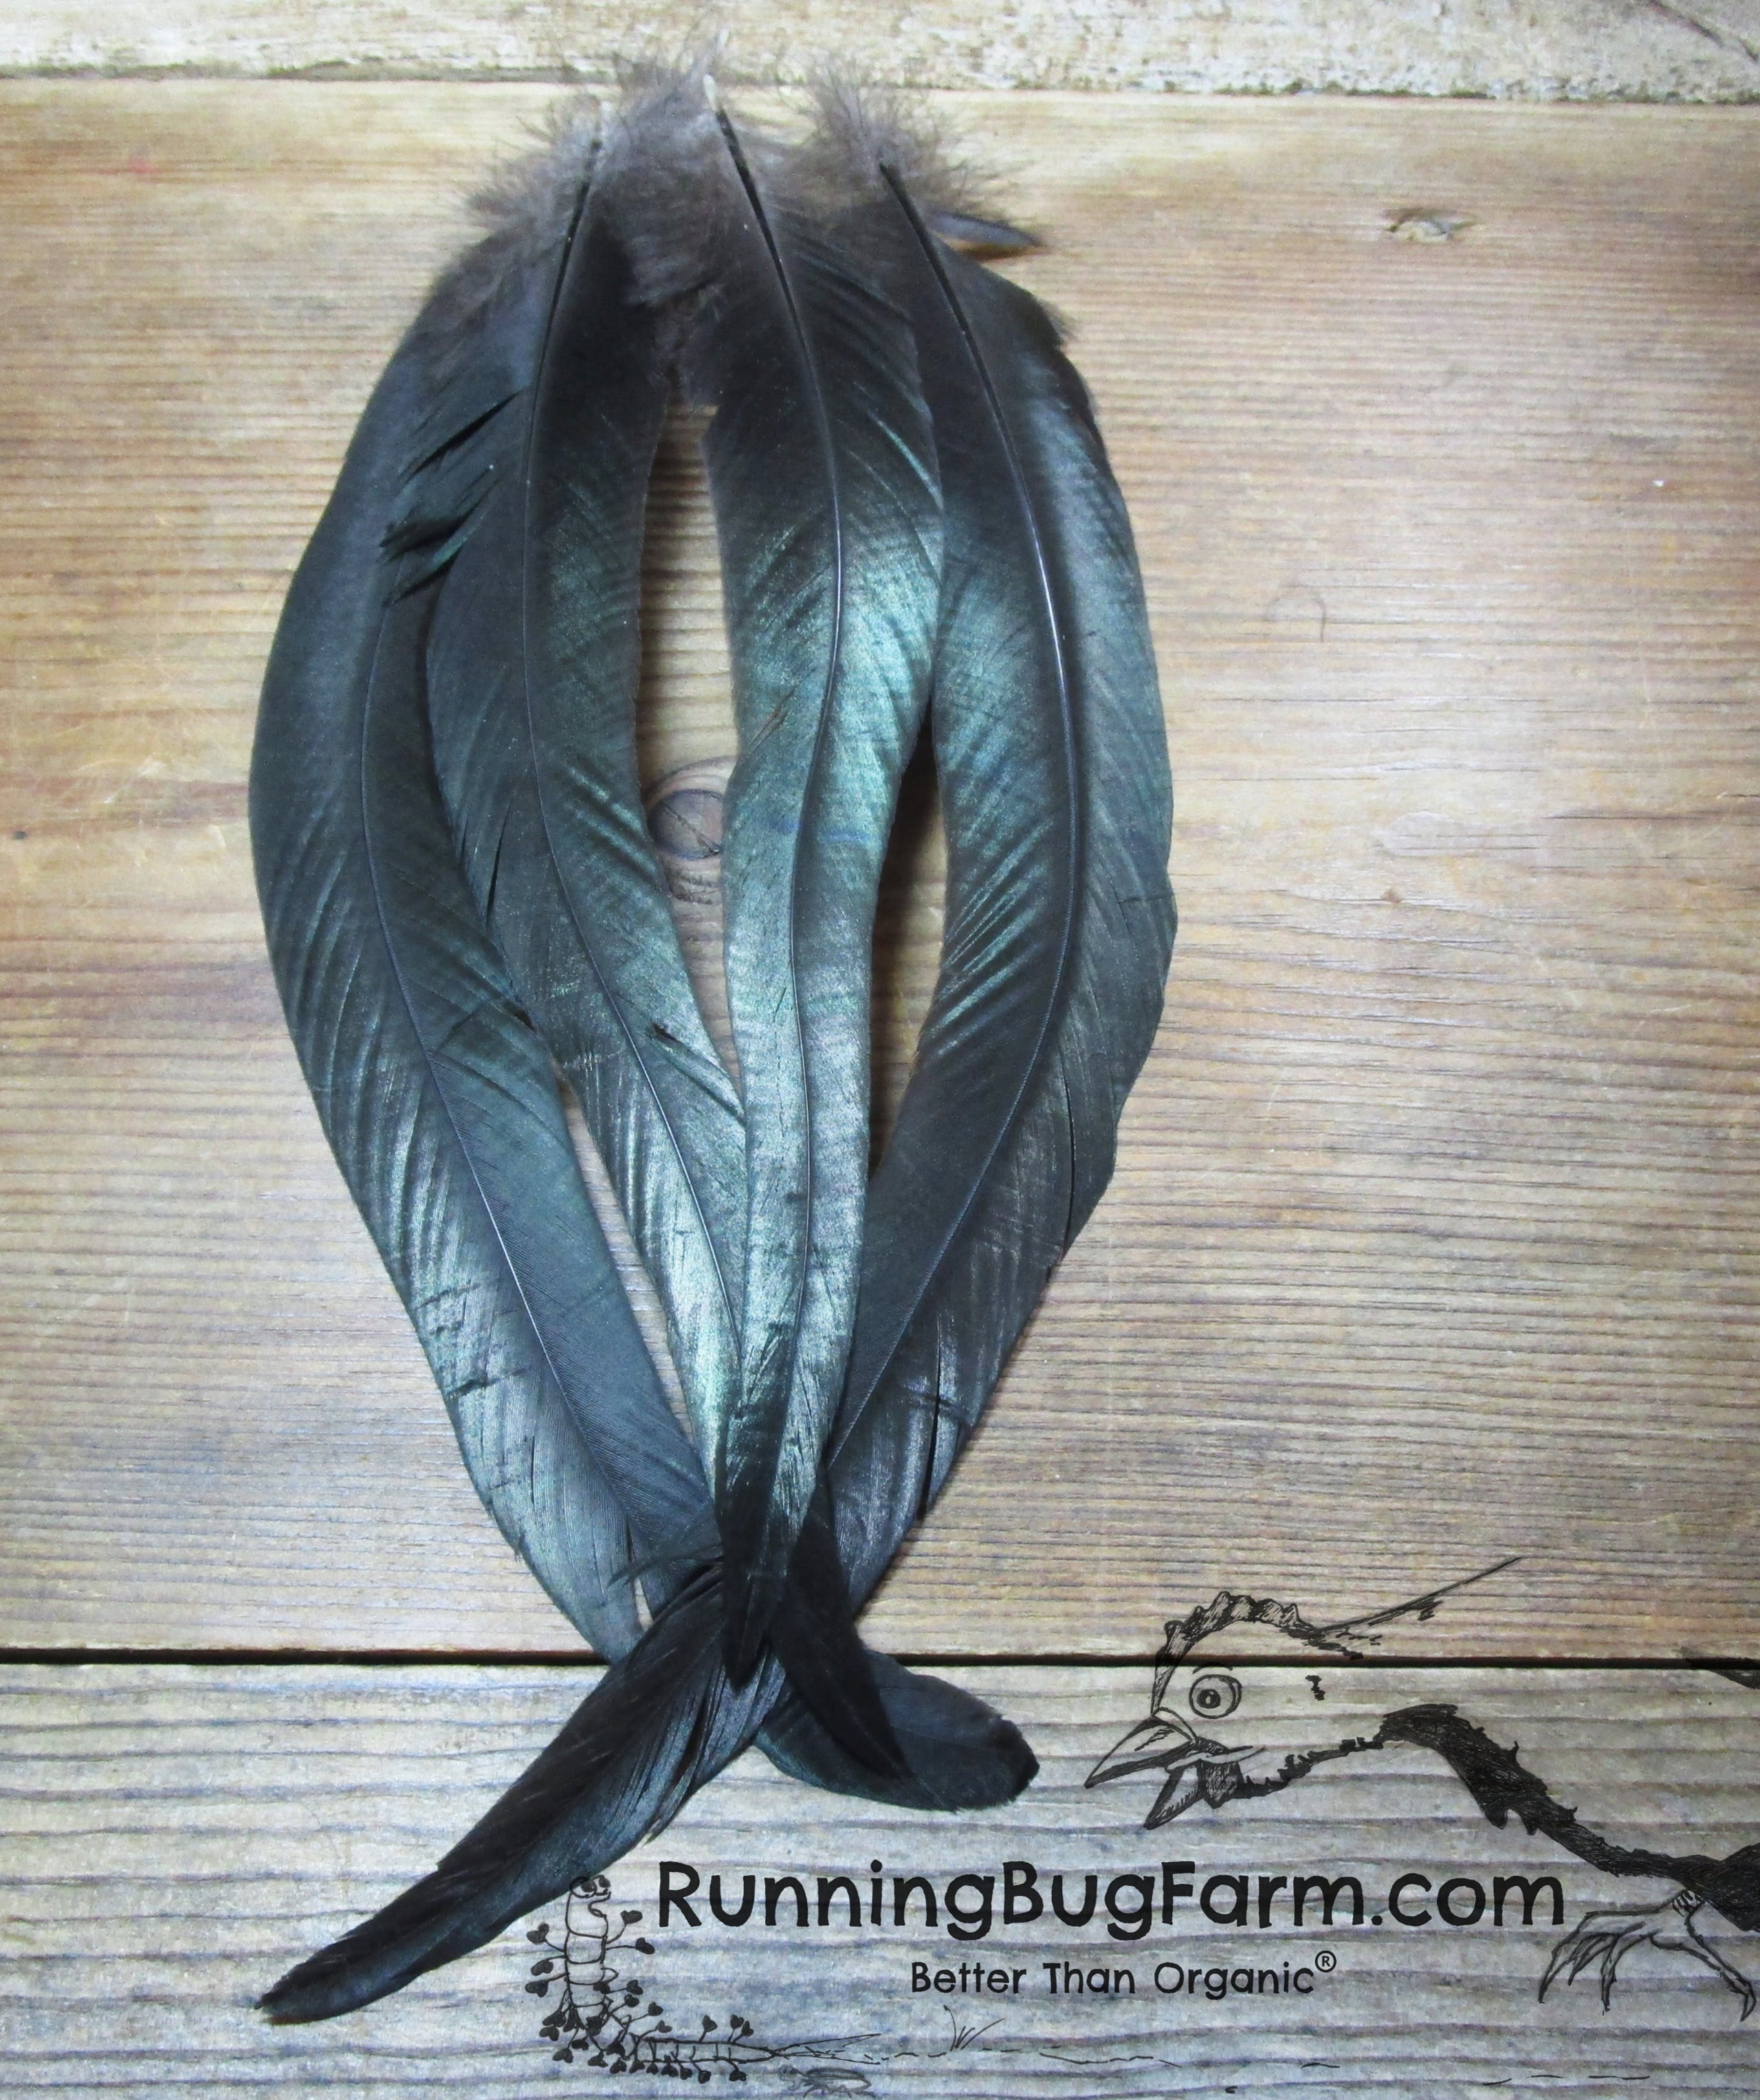 Black Australorp Rooster Tail Feathers Qty: 4 Size: 10-13 (Gallus  domesticus)